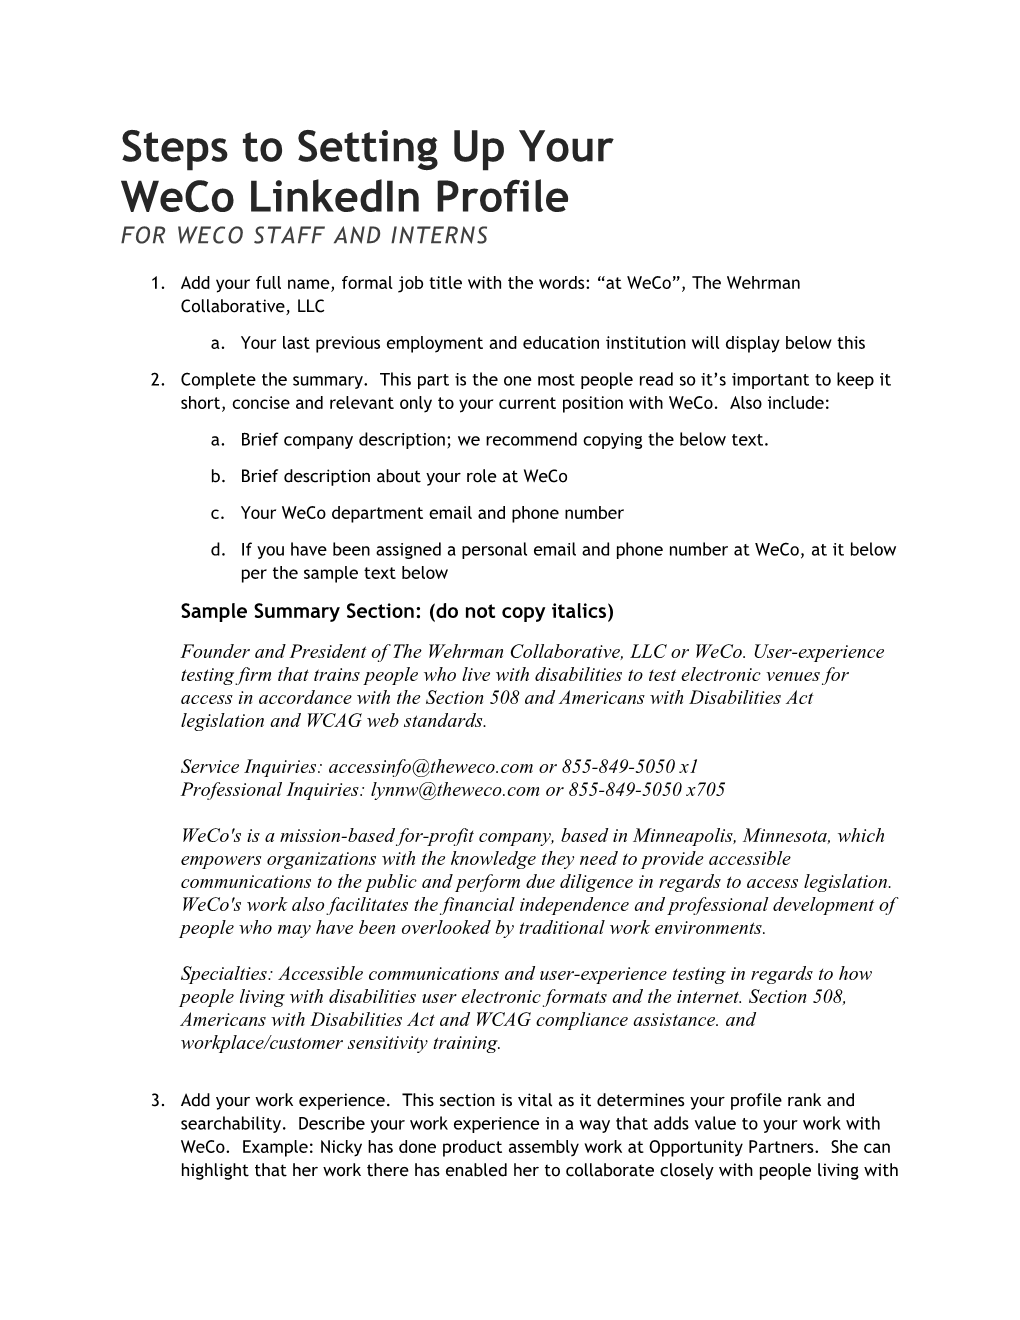 Steps to Setting up Your Weco Linkedin Profile